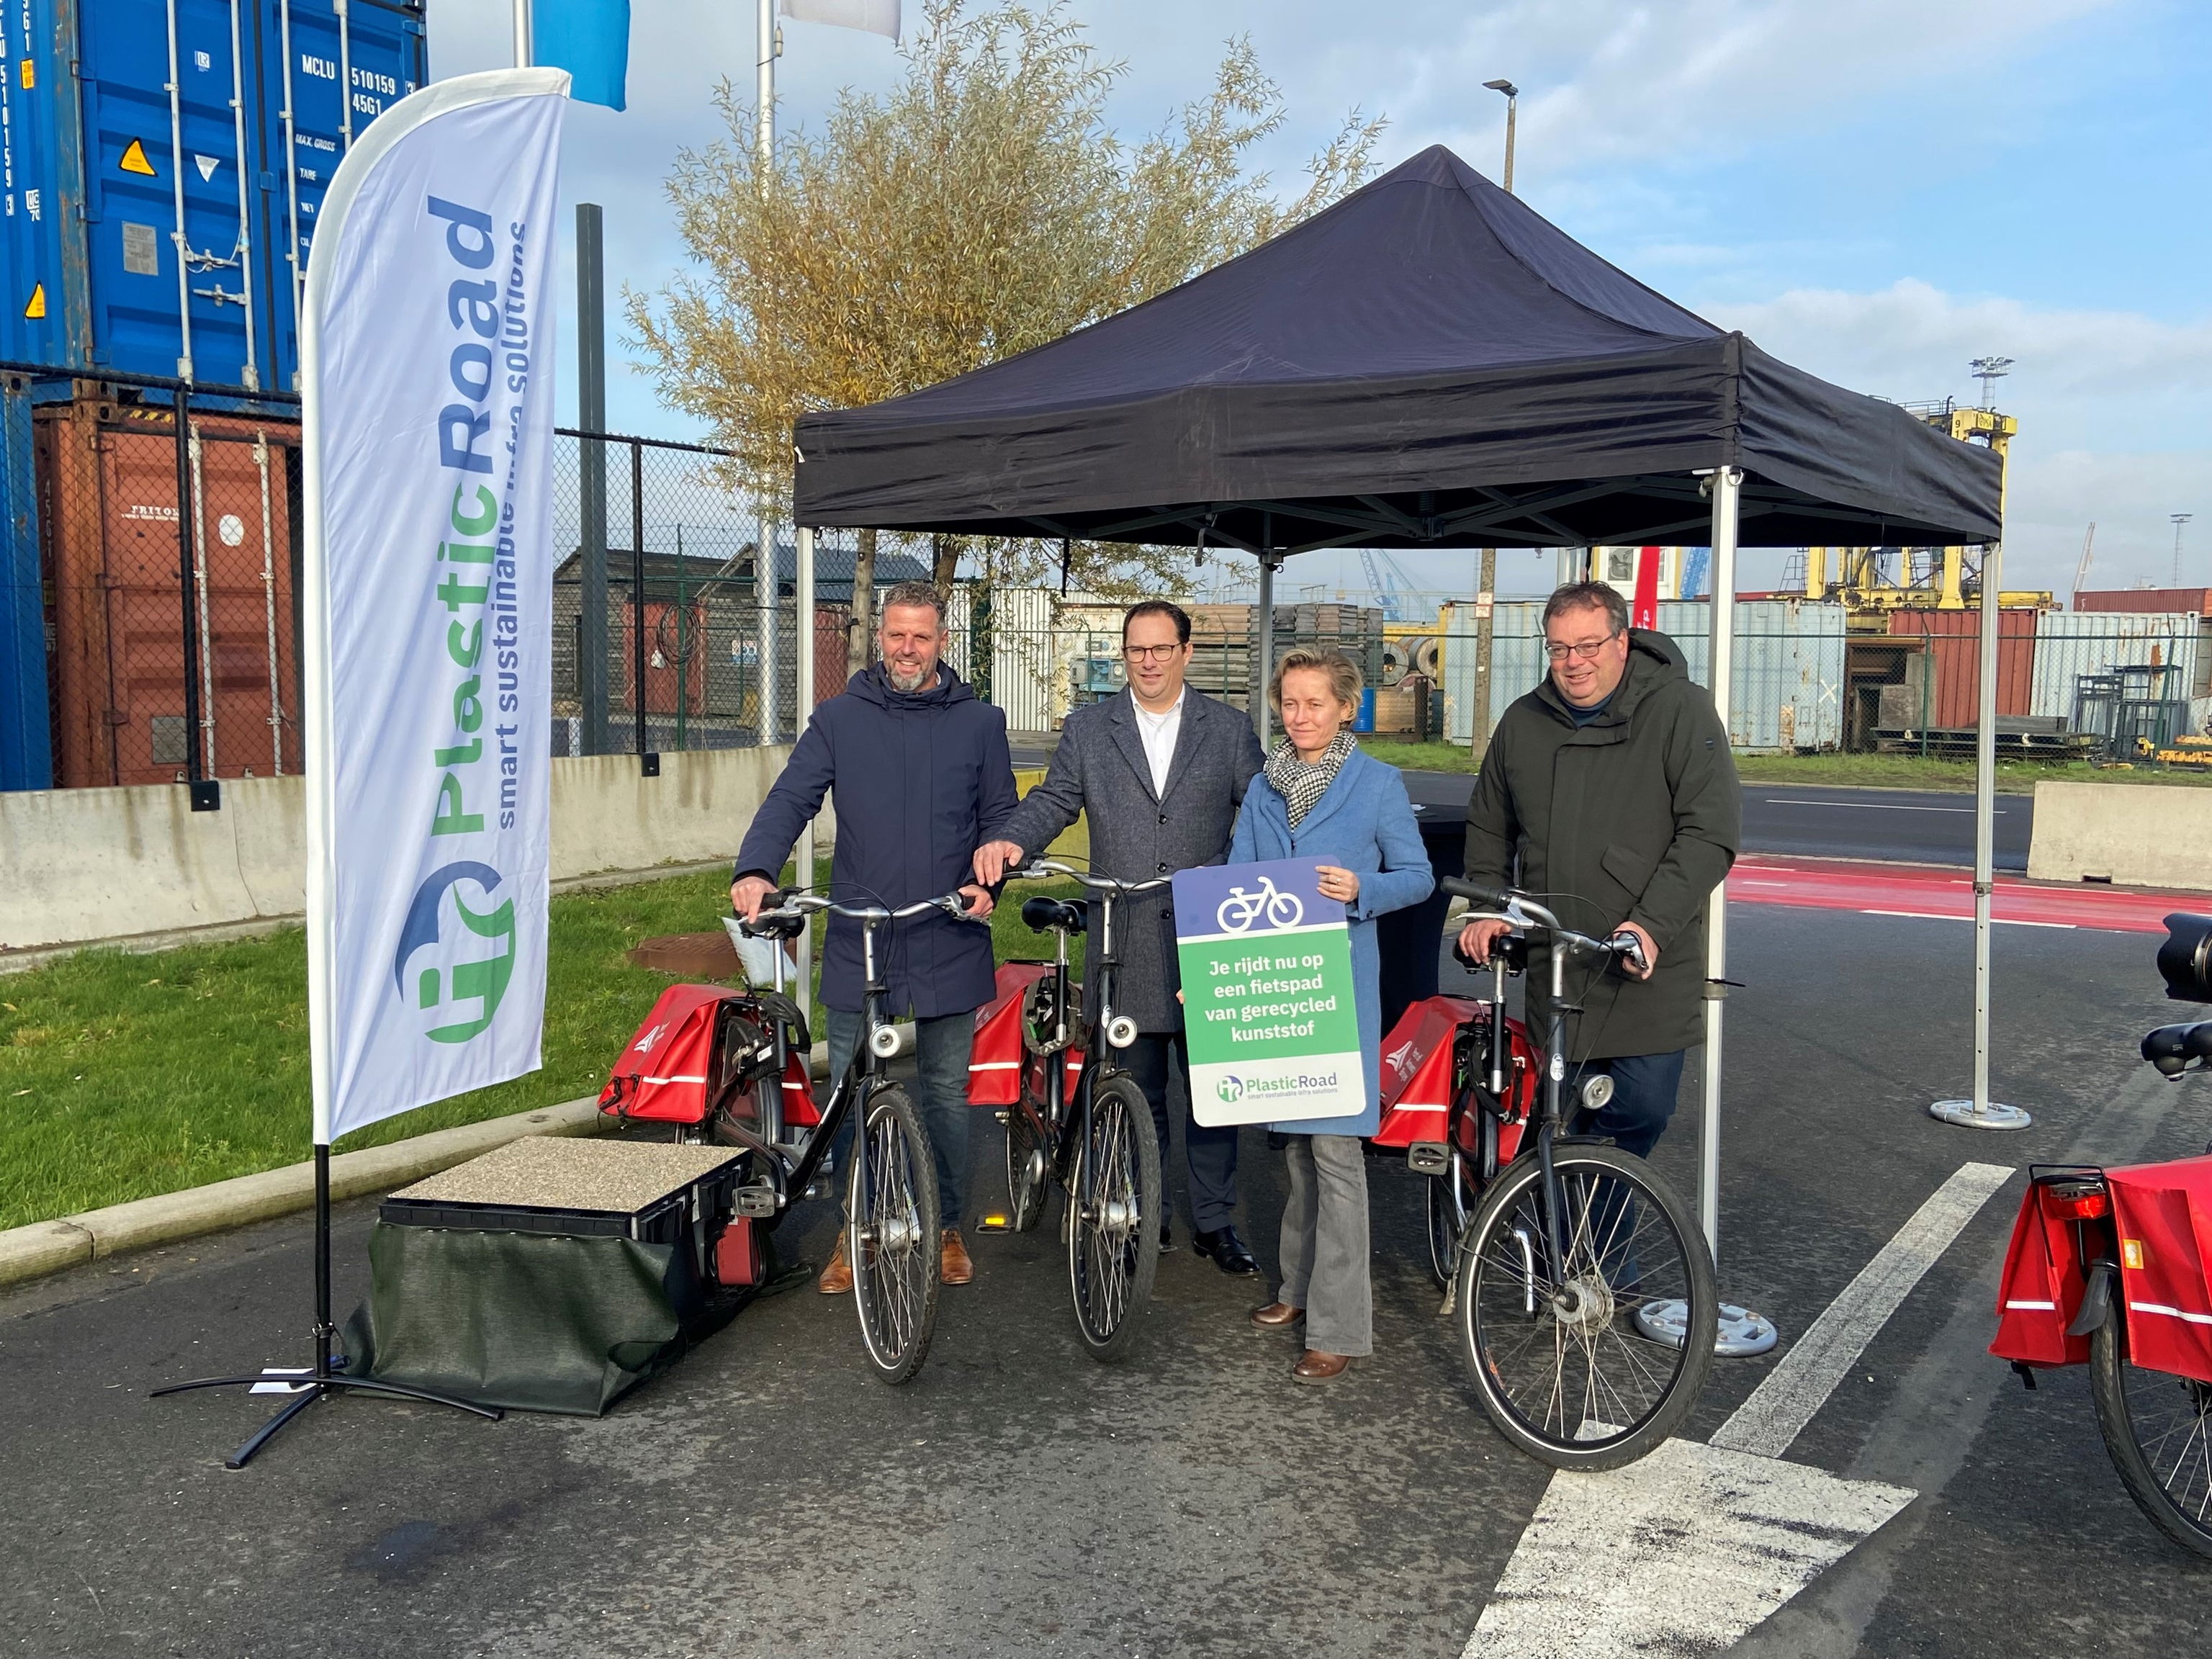 From left to right: Anton Boom, PlasticRoad Manager; Jeroen Oudshoorn, PlasticRoad Managing Director; Annick De Ridder, Vice-Mayor of the City of Antwerp; Rob Smeets, COO Port of Antwerp-Bruges